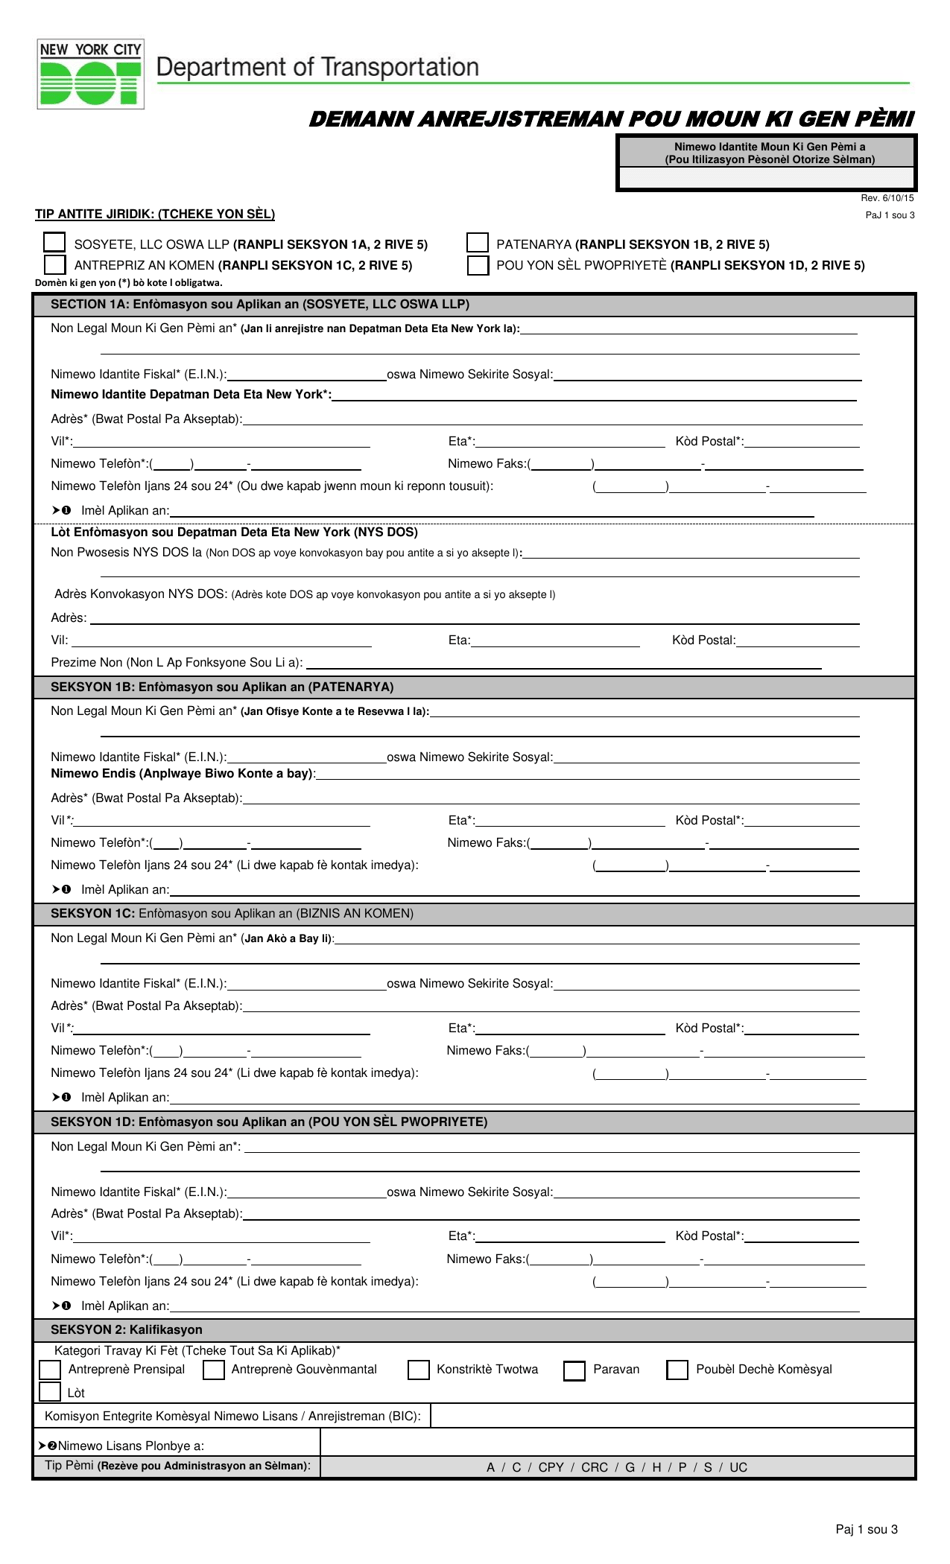 Permittee Registration Application - New York City (Haitian Creole), Page 1